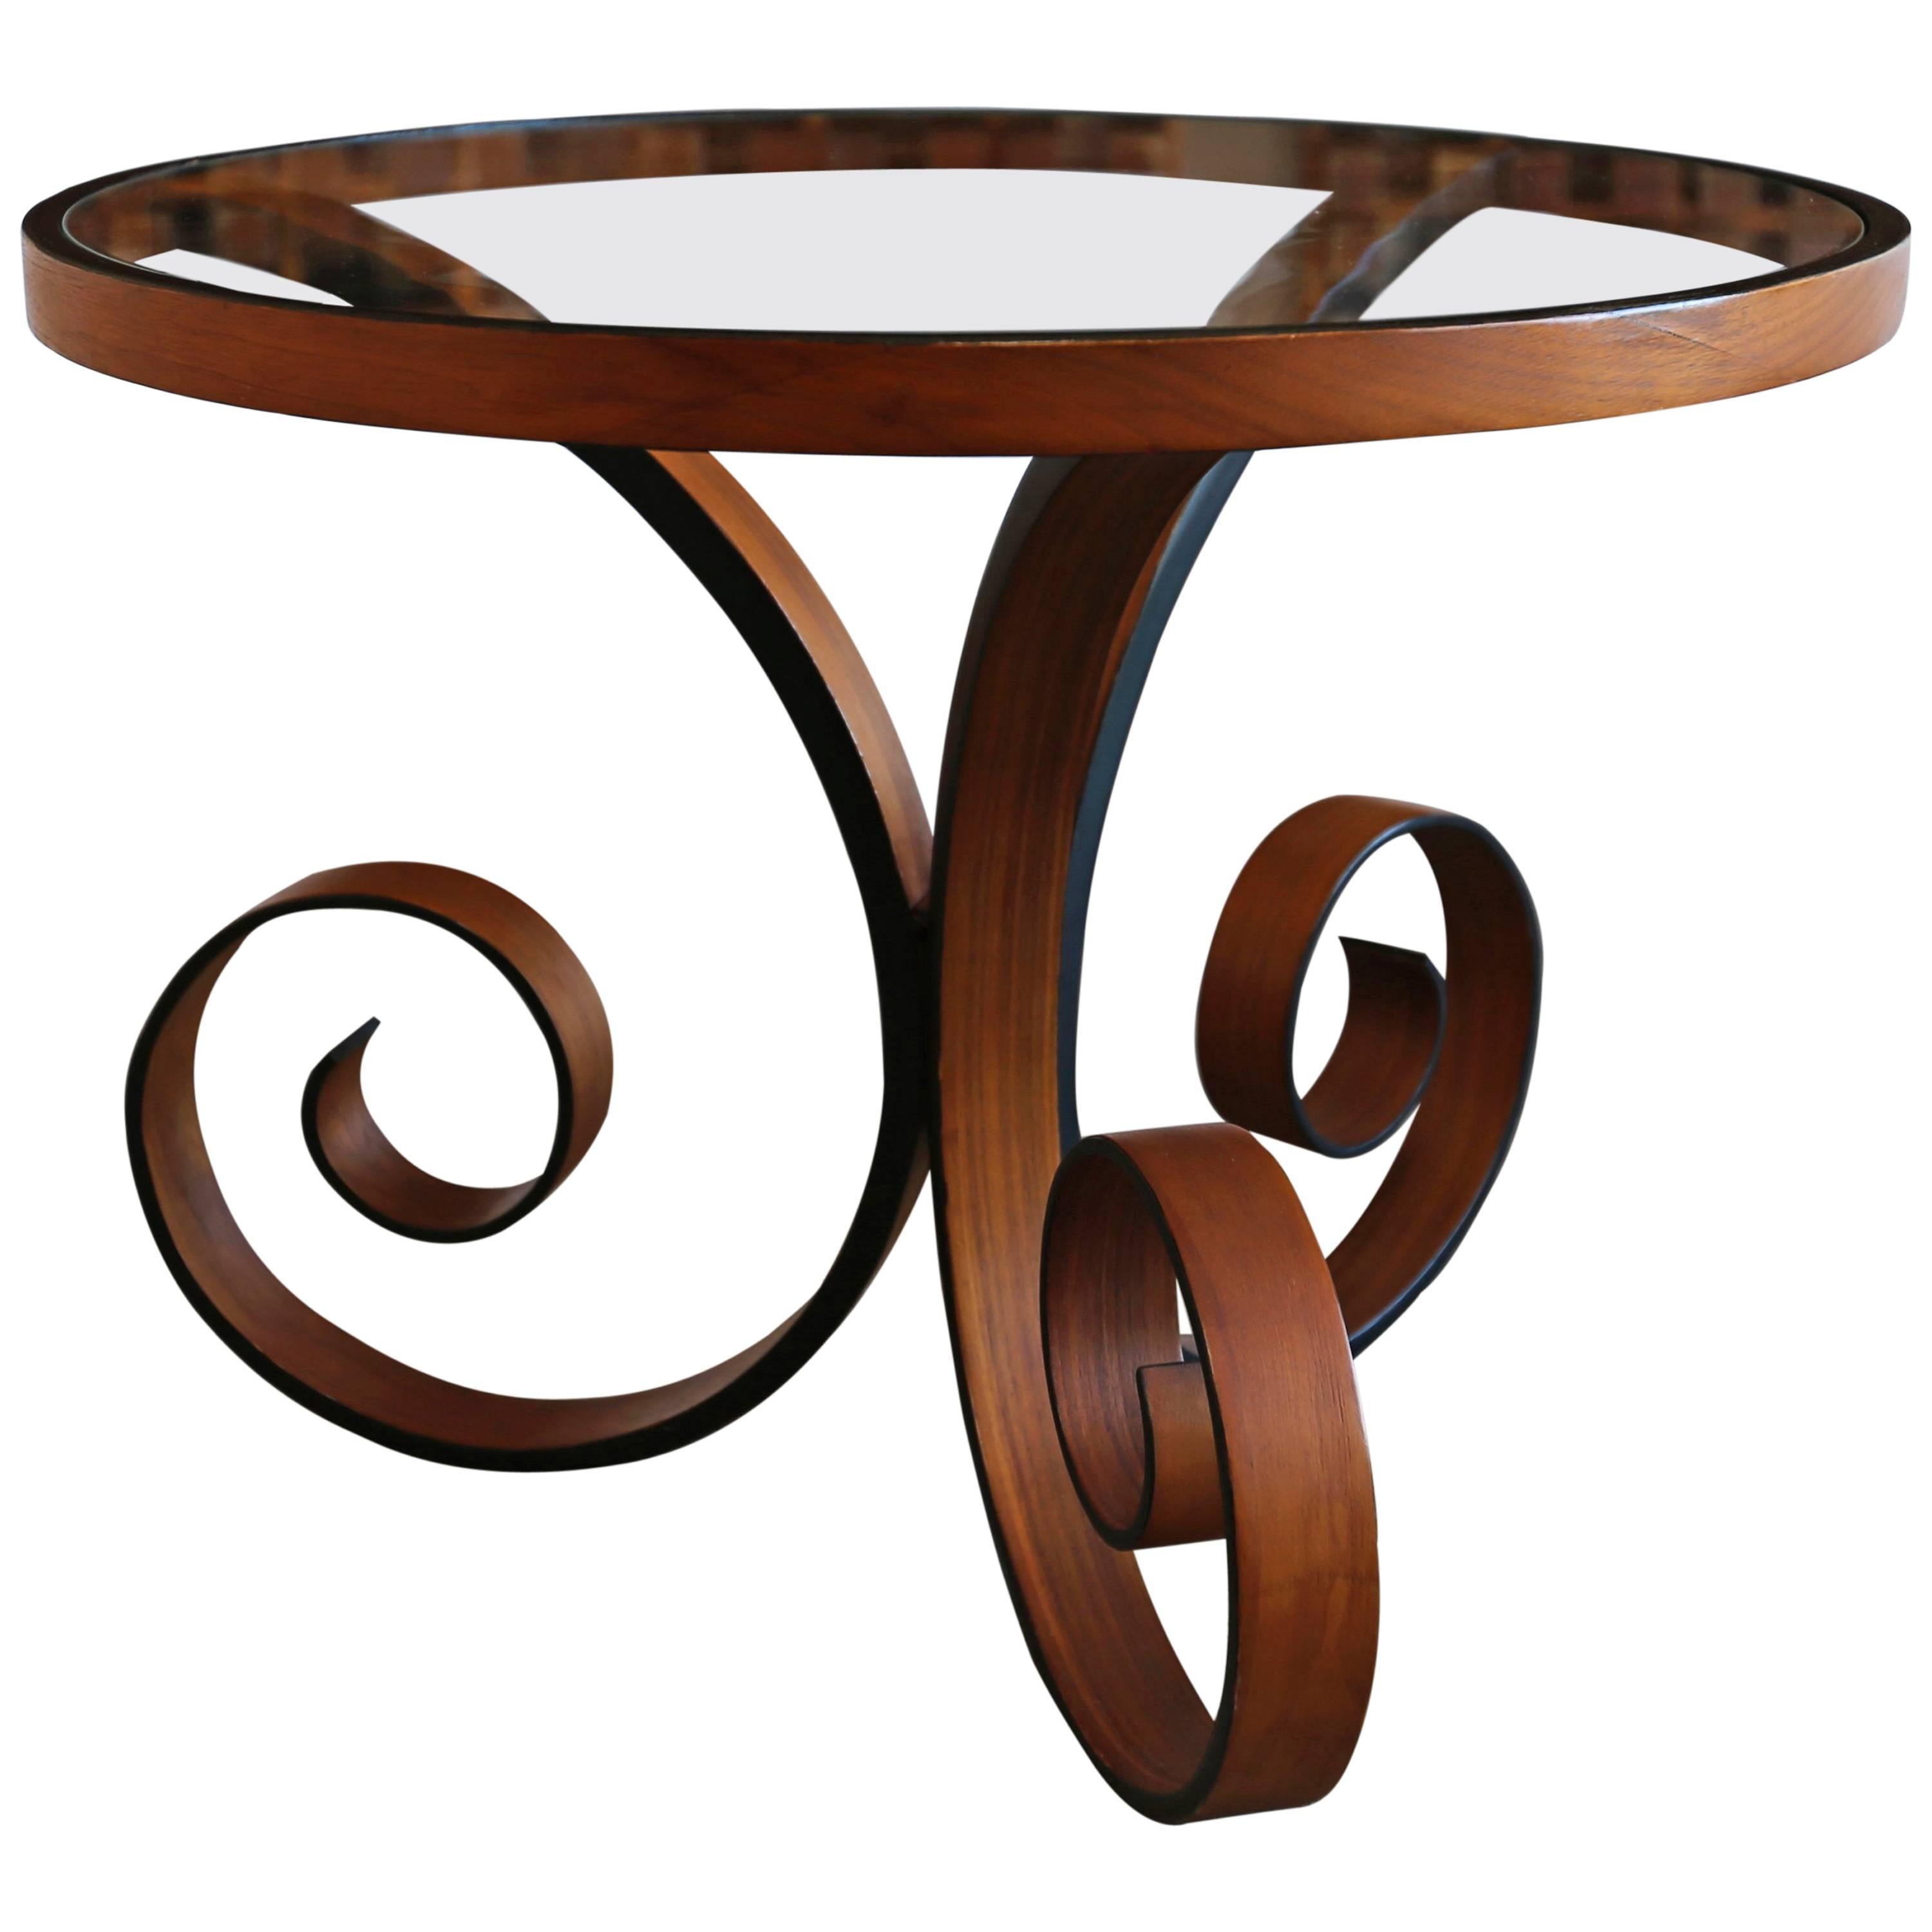 "Sultana" Occasional Table by George Mulhauser